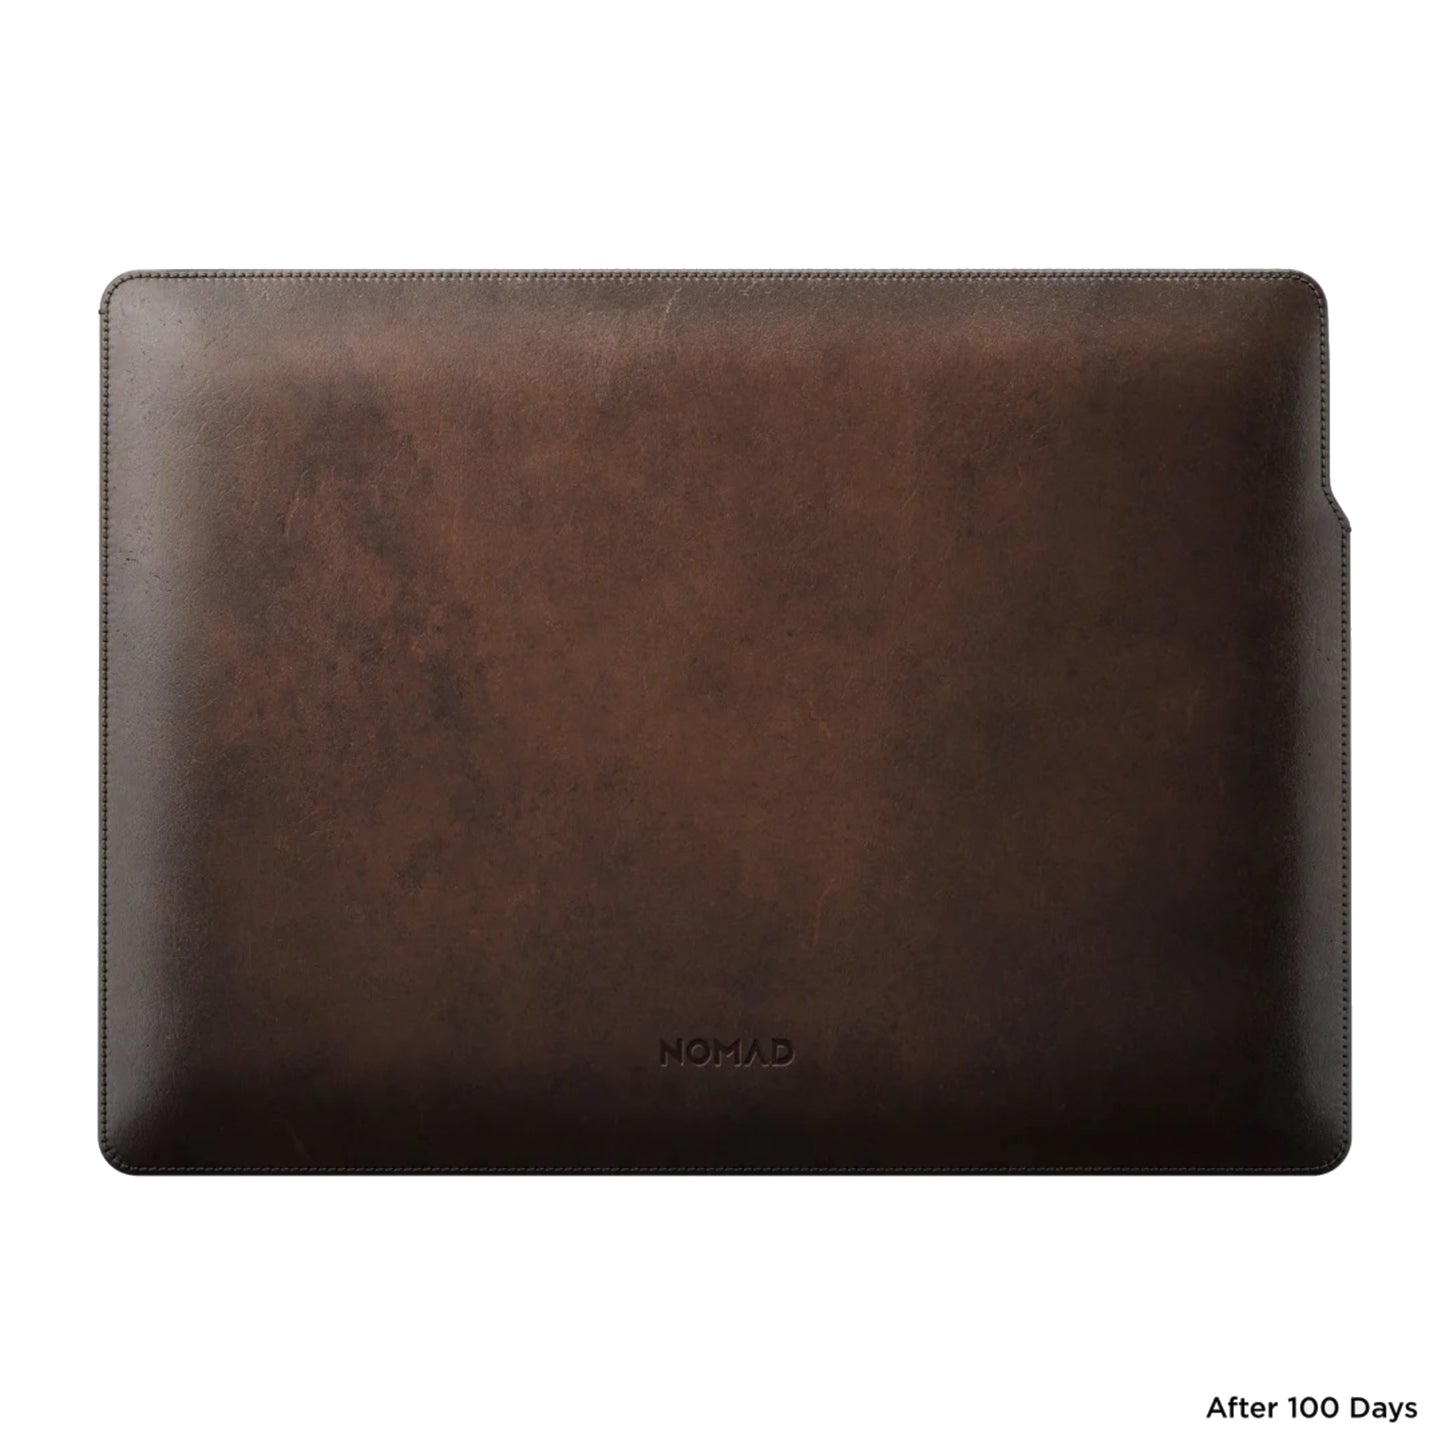 Nomad Horween Leather Sleeve for MacBook Pro / MacBook Air